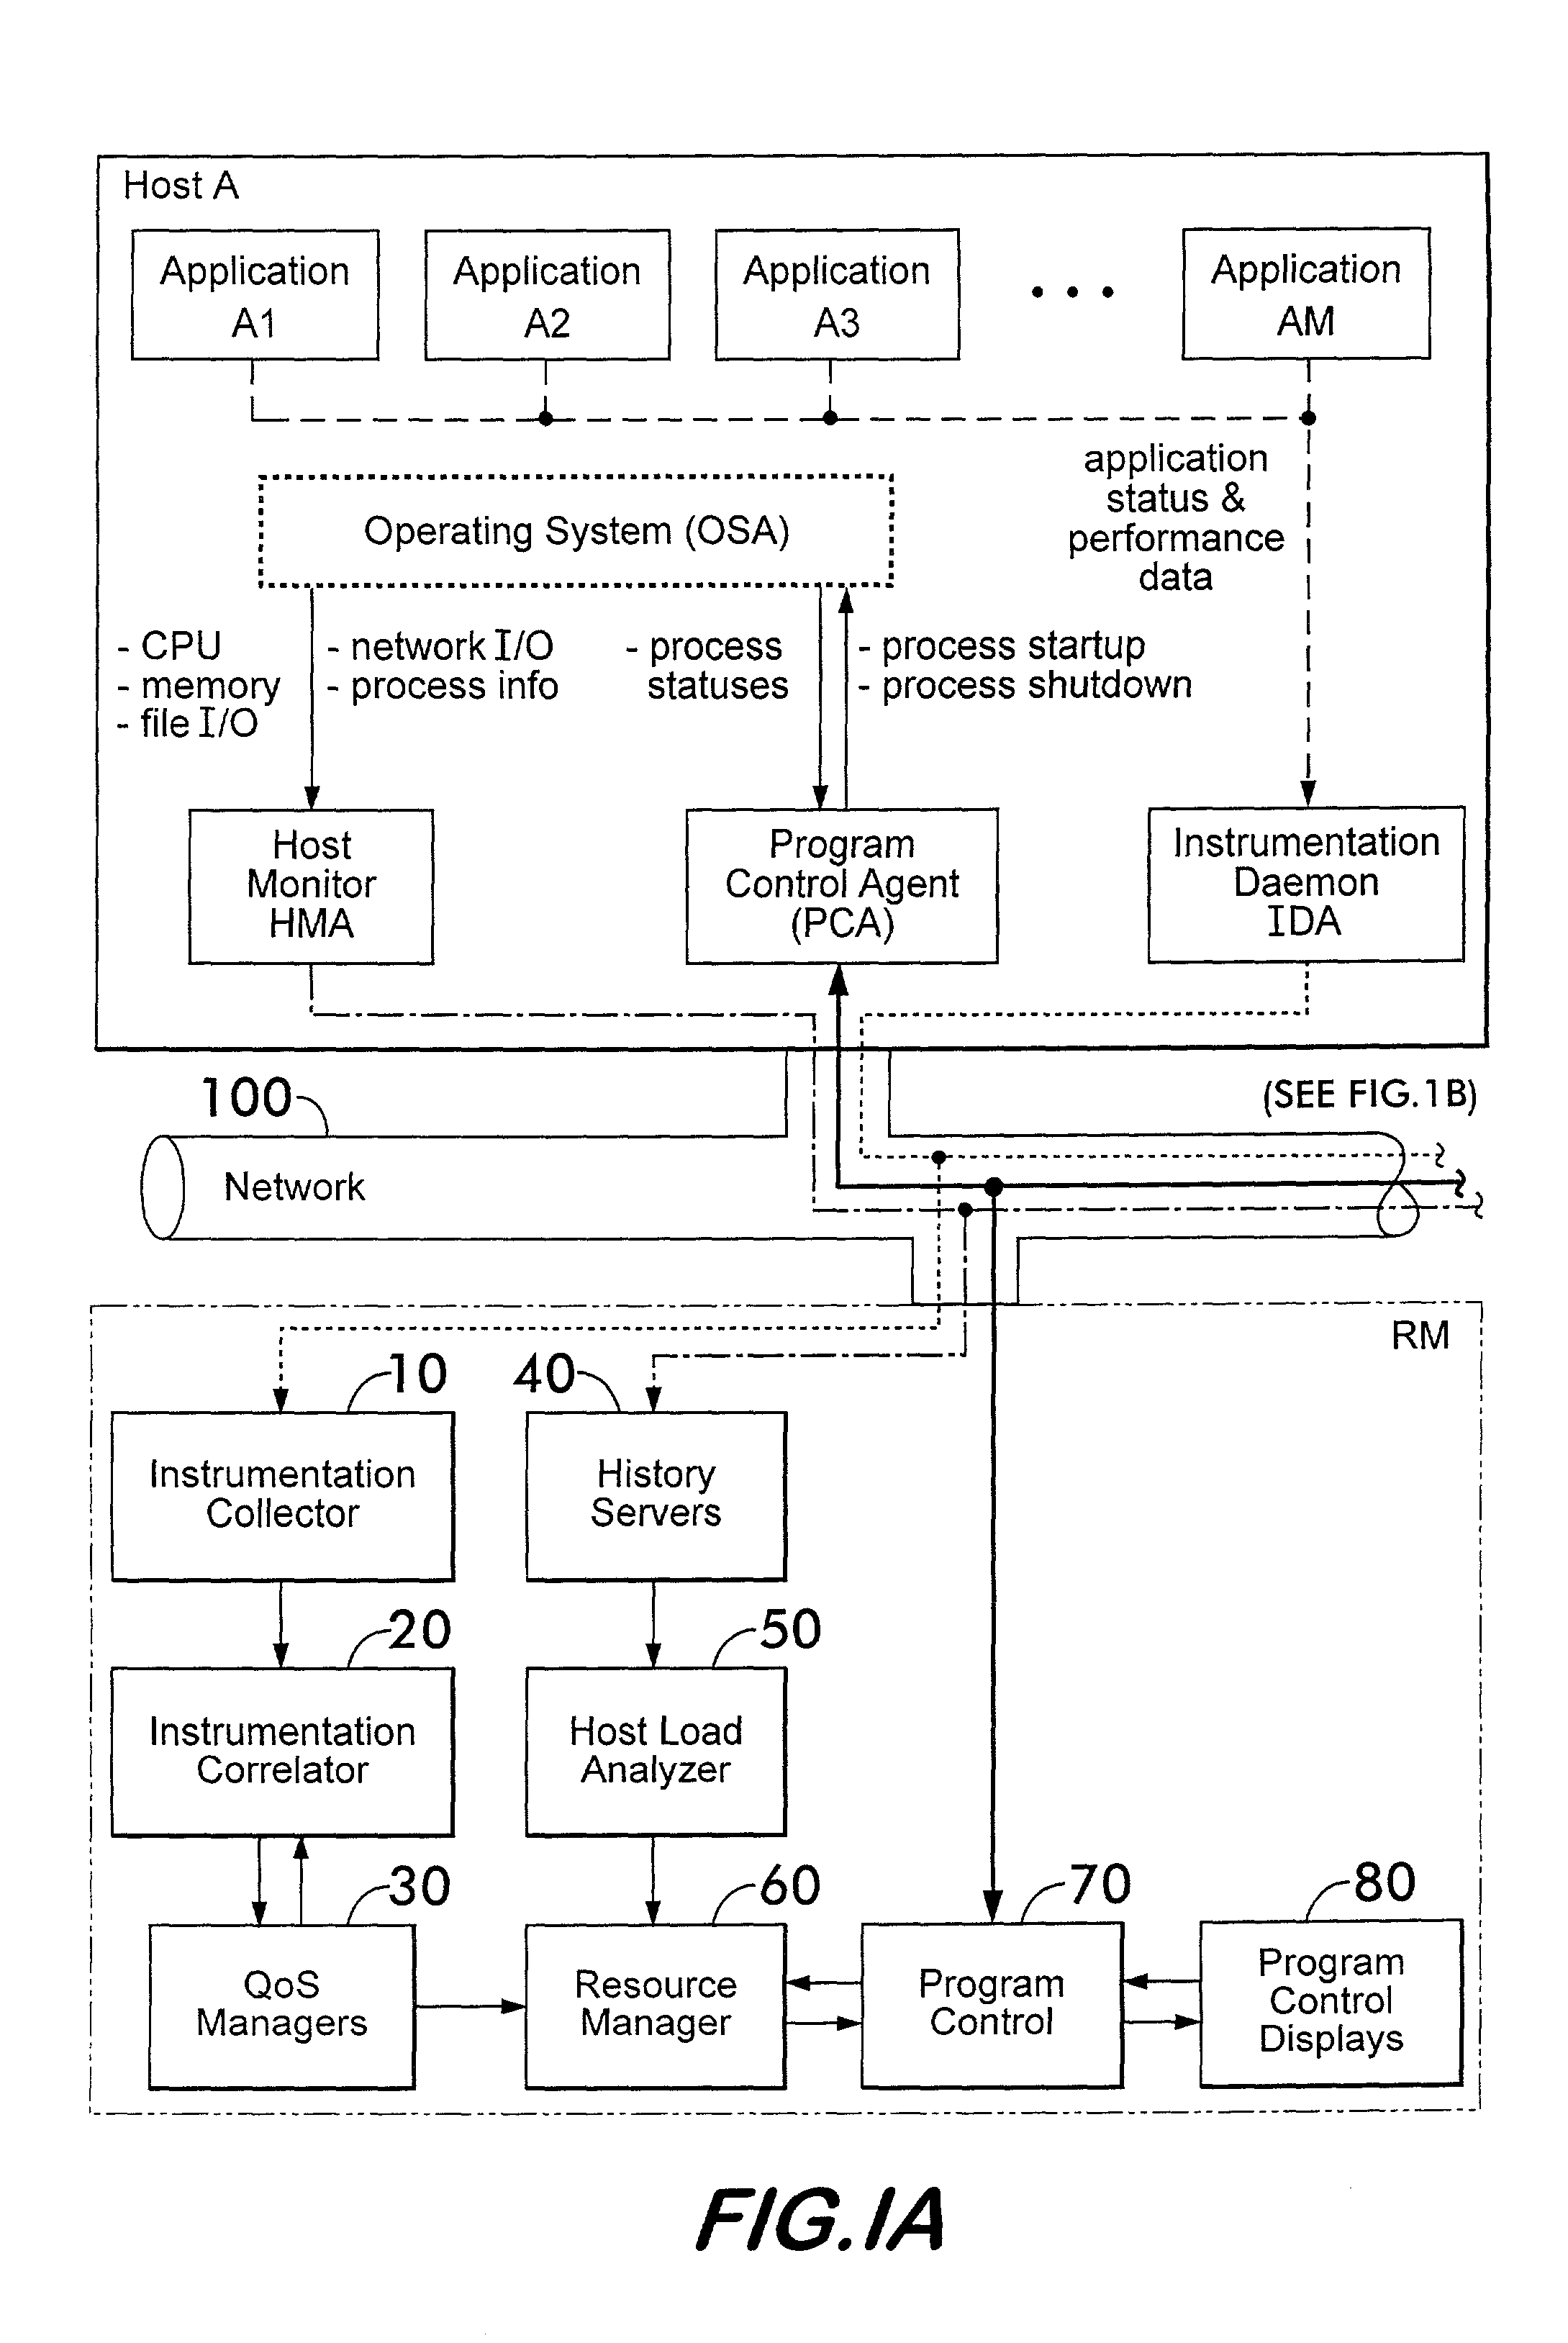 System for monitoring and reporting performance of hosts and applications and selectively configuring applications in a resource managed system